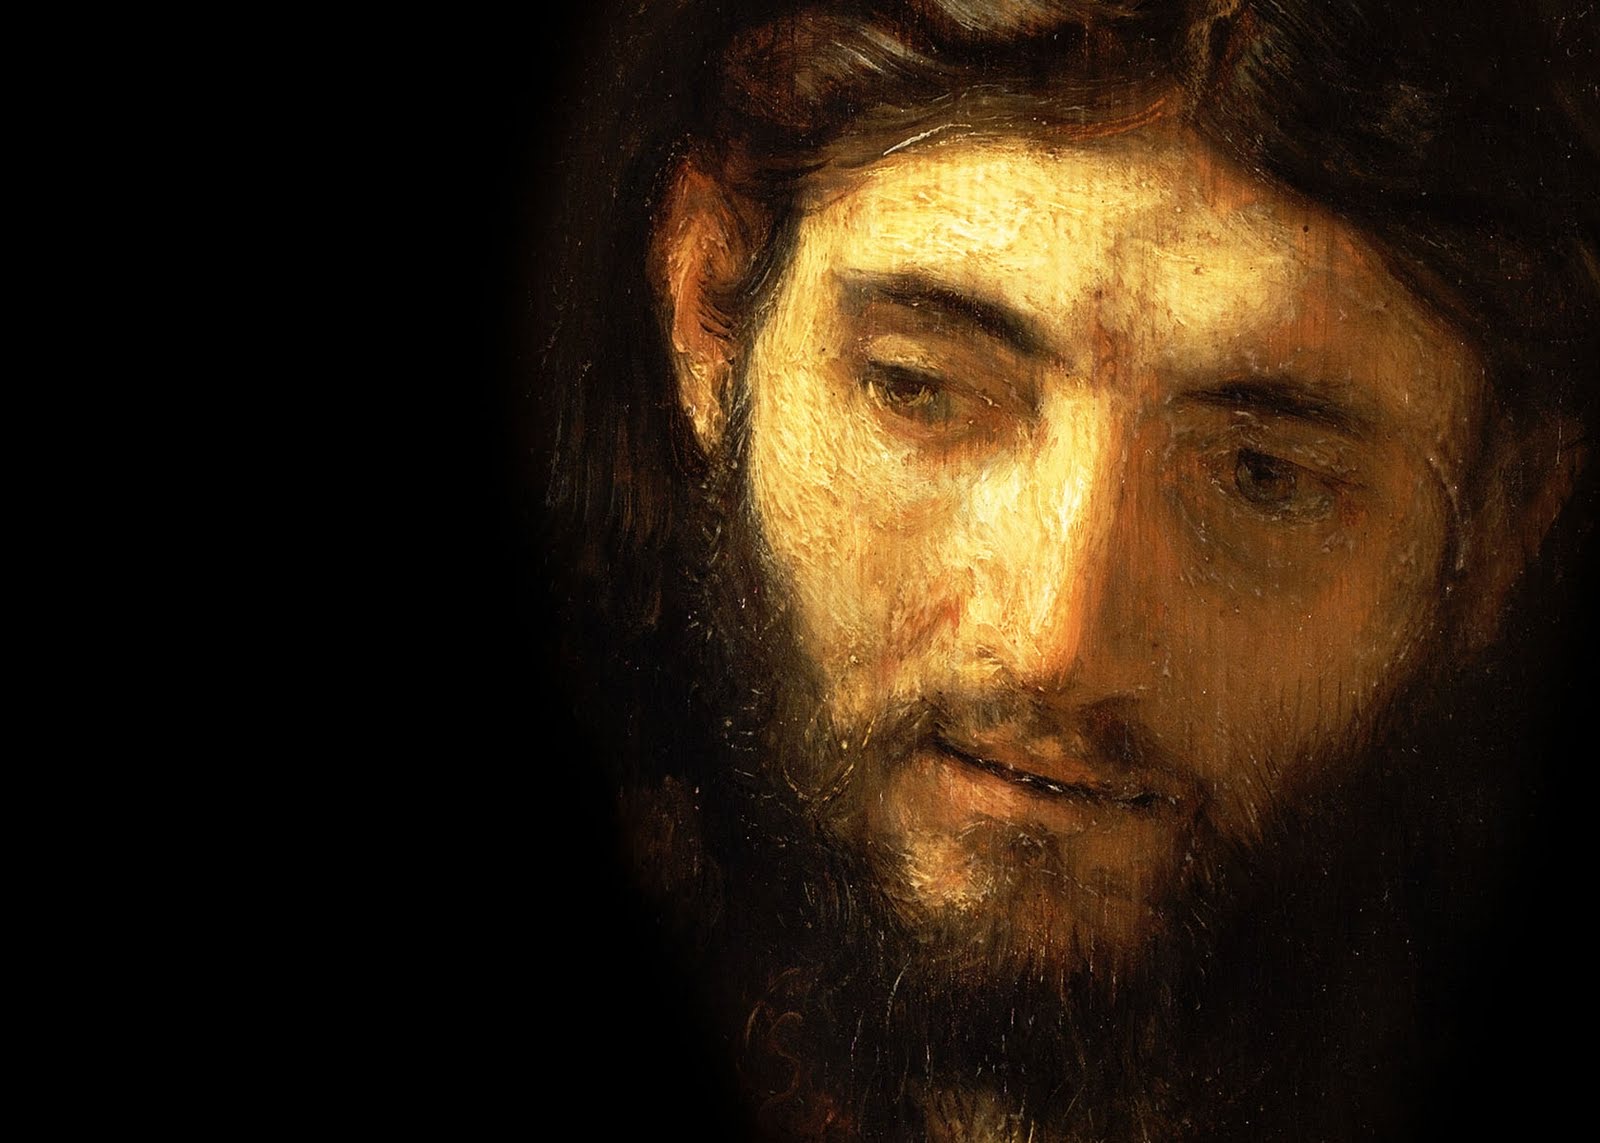 Rediscovering Jesus: The Living Stone in an Age of Fragility